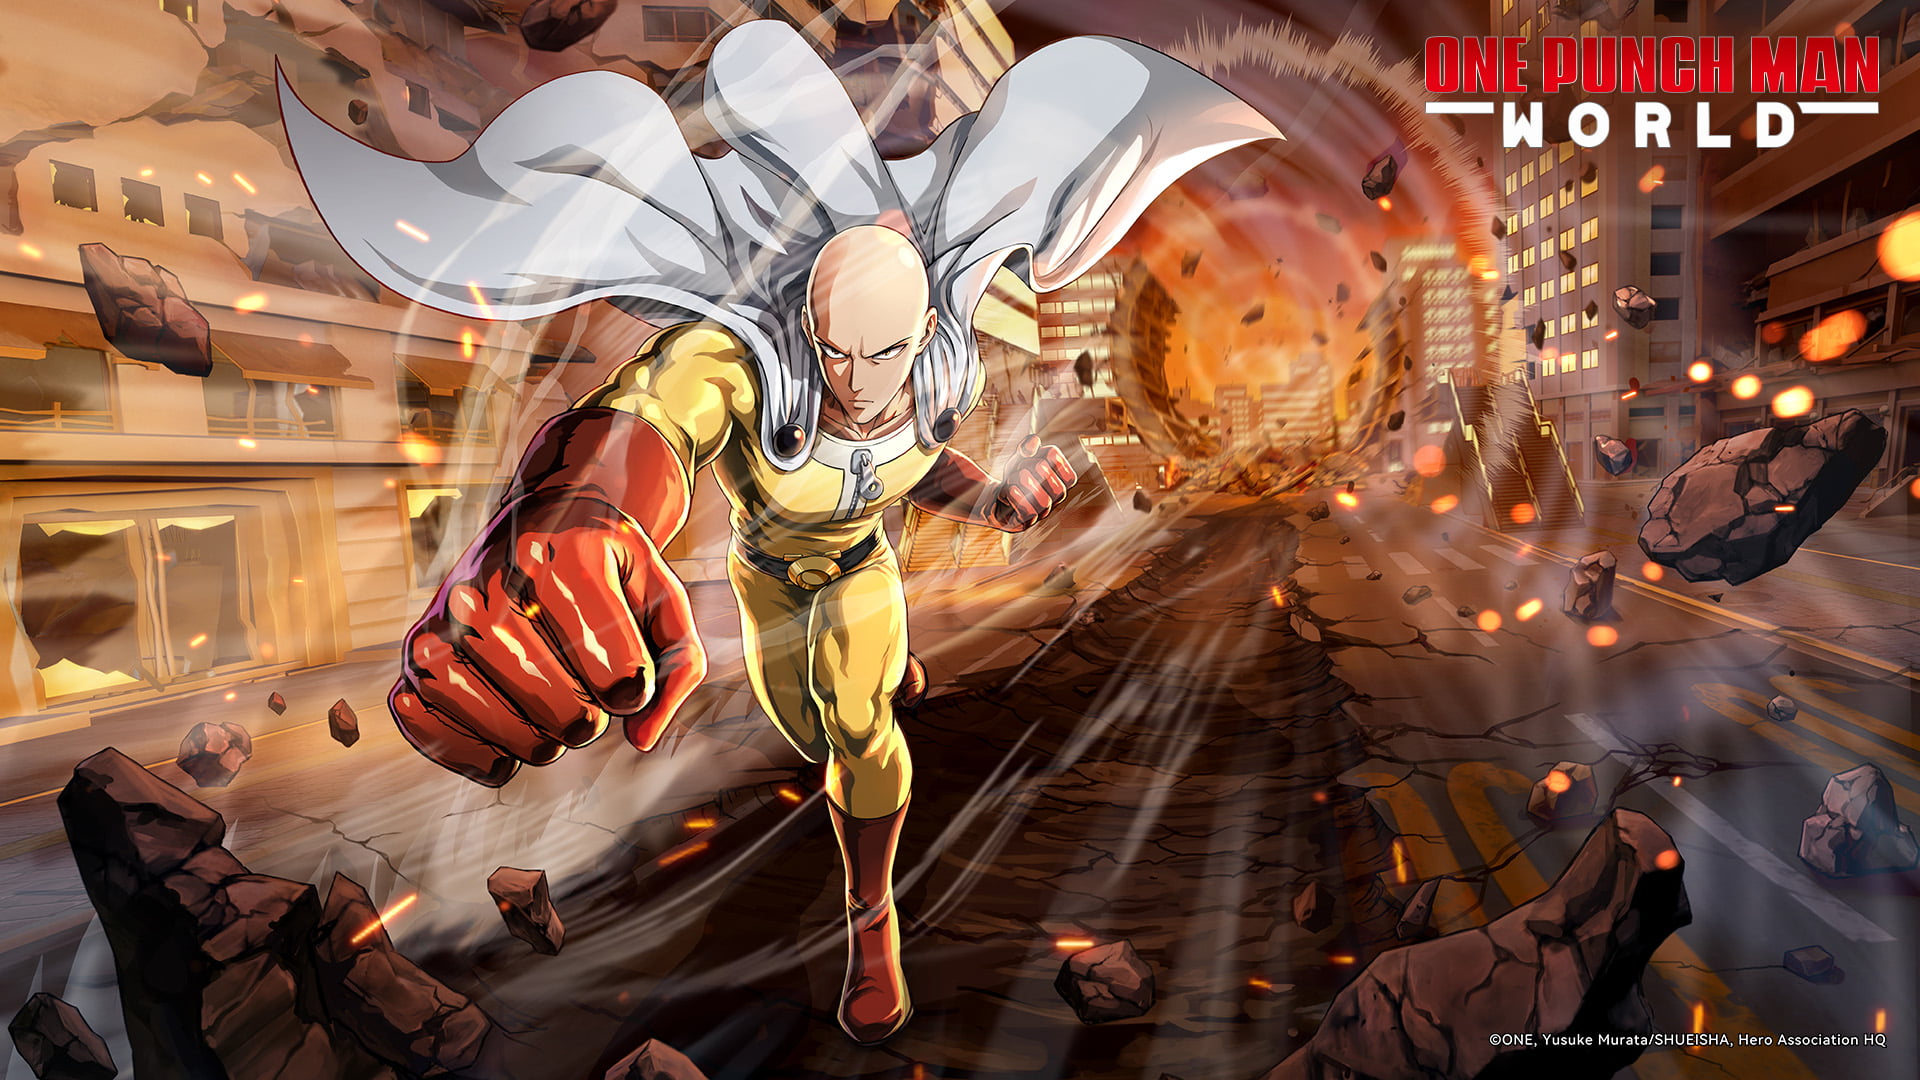 One Punch Man World Cover